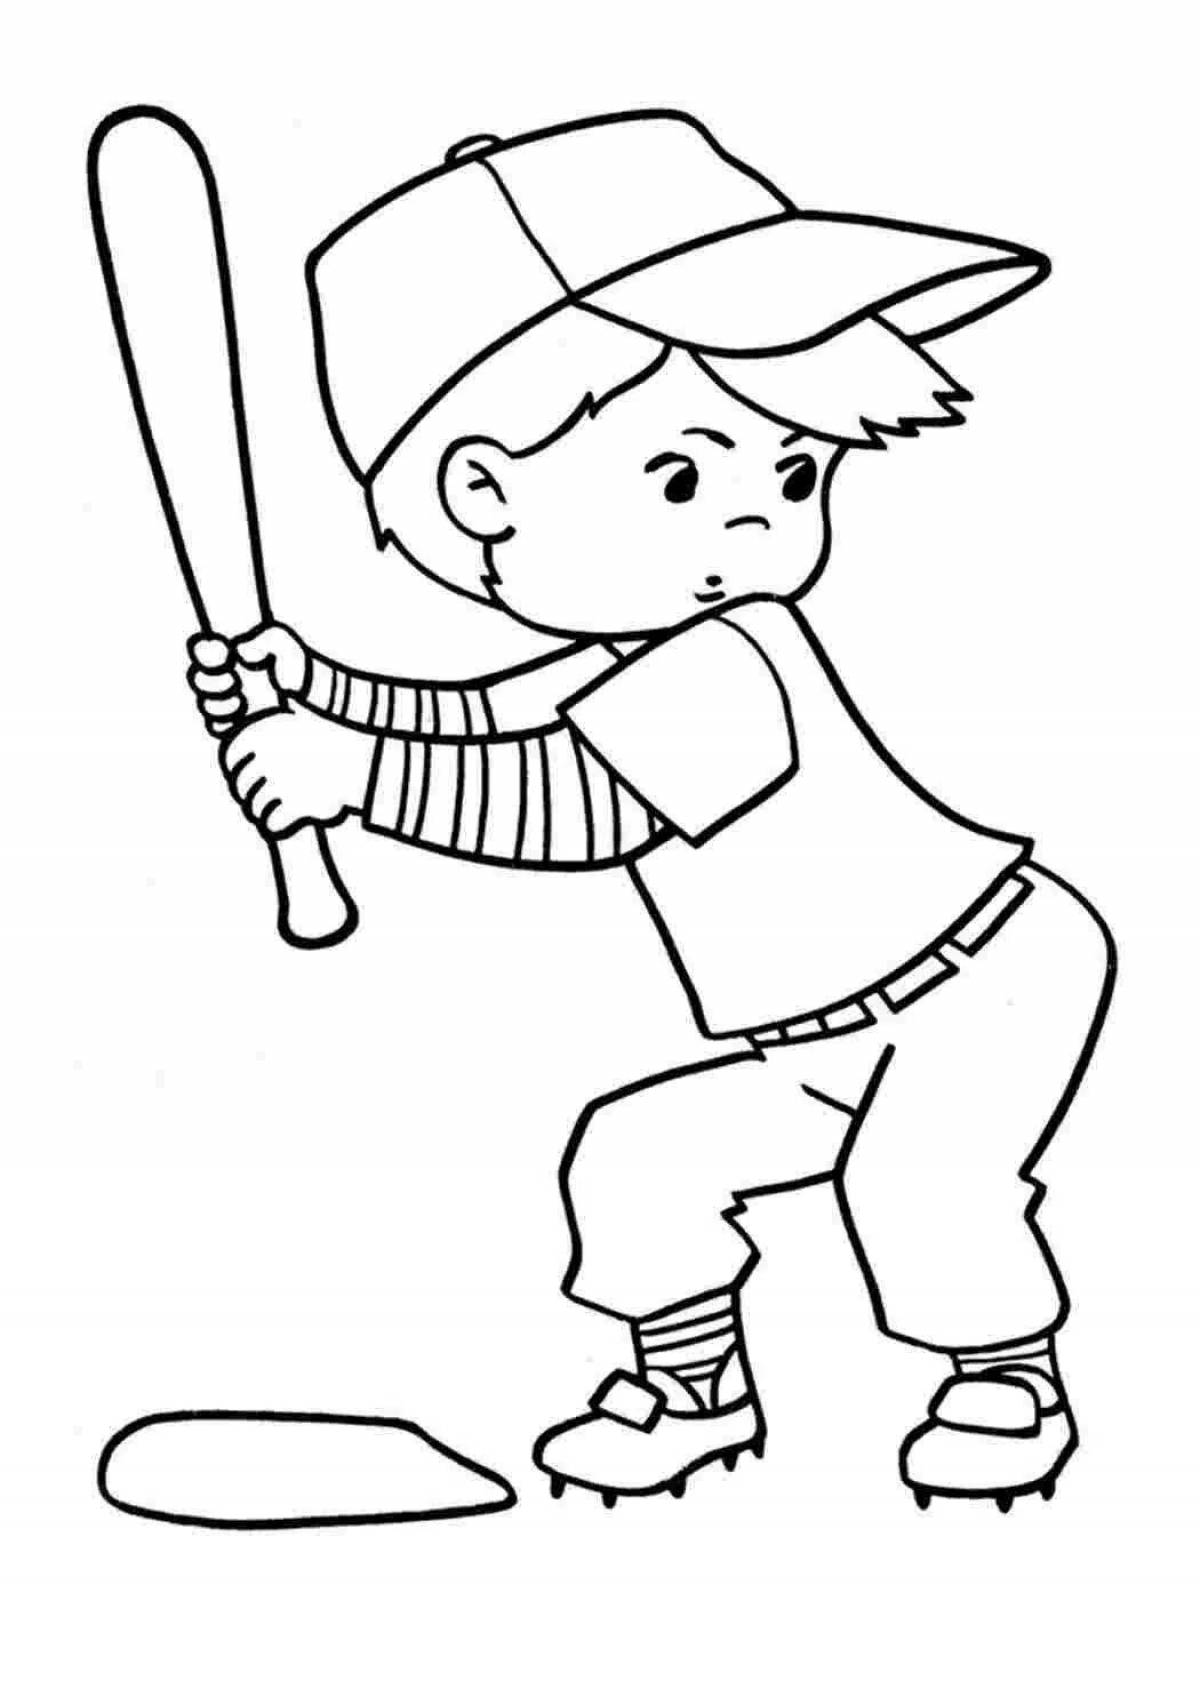 Colorful sports coloring book for 4-5 year olds